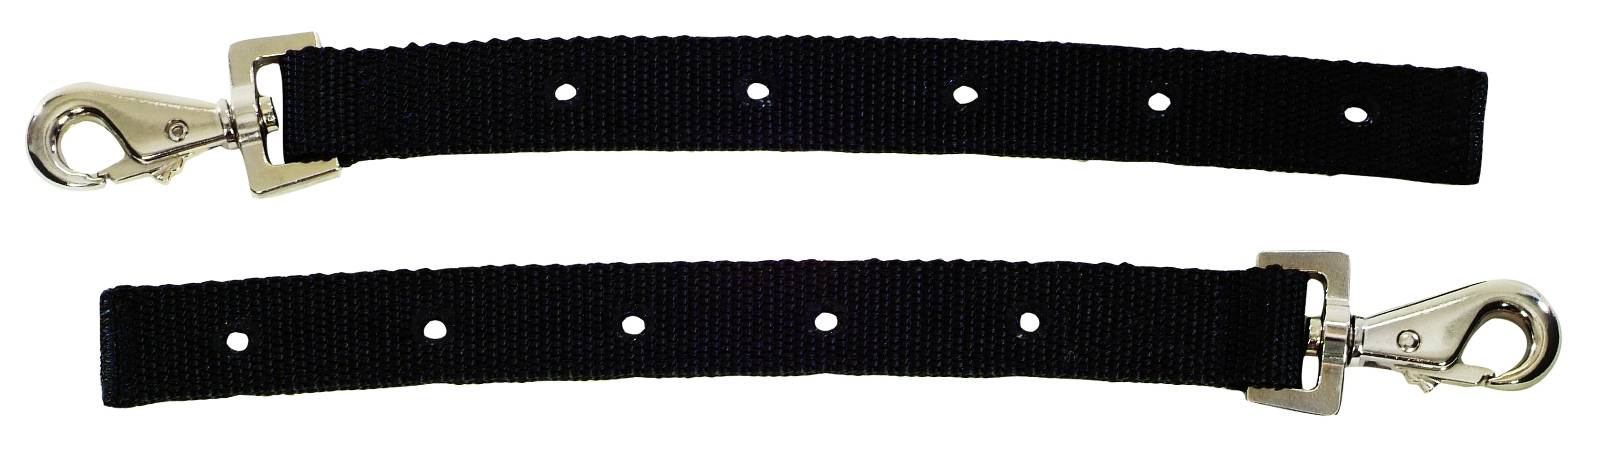 Shires Equestrian Spare Surcingle Strap for Horse Blankets Navy Set 